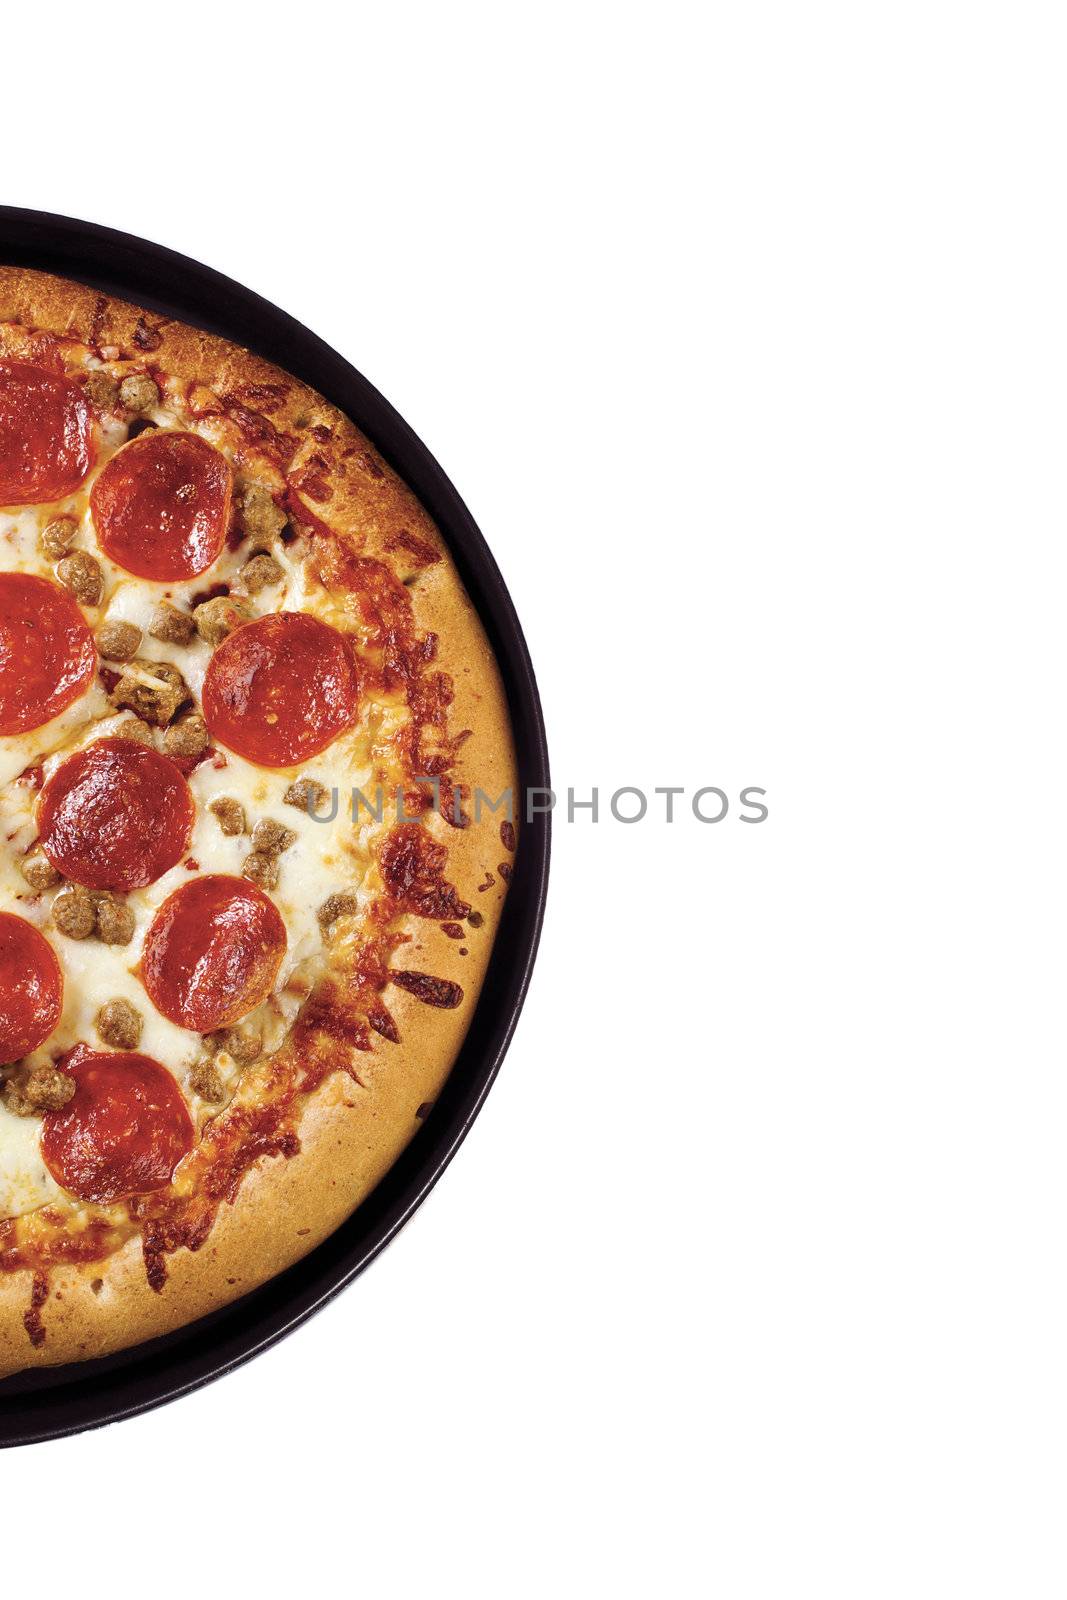 cropped image of a pepperoni pizza by kozzi